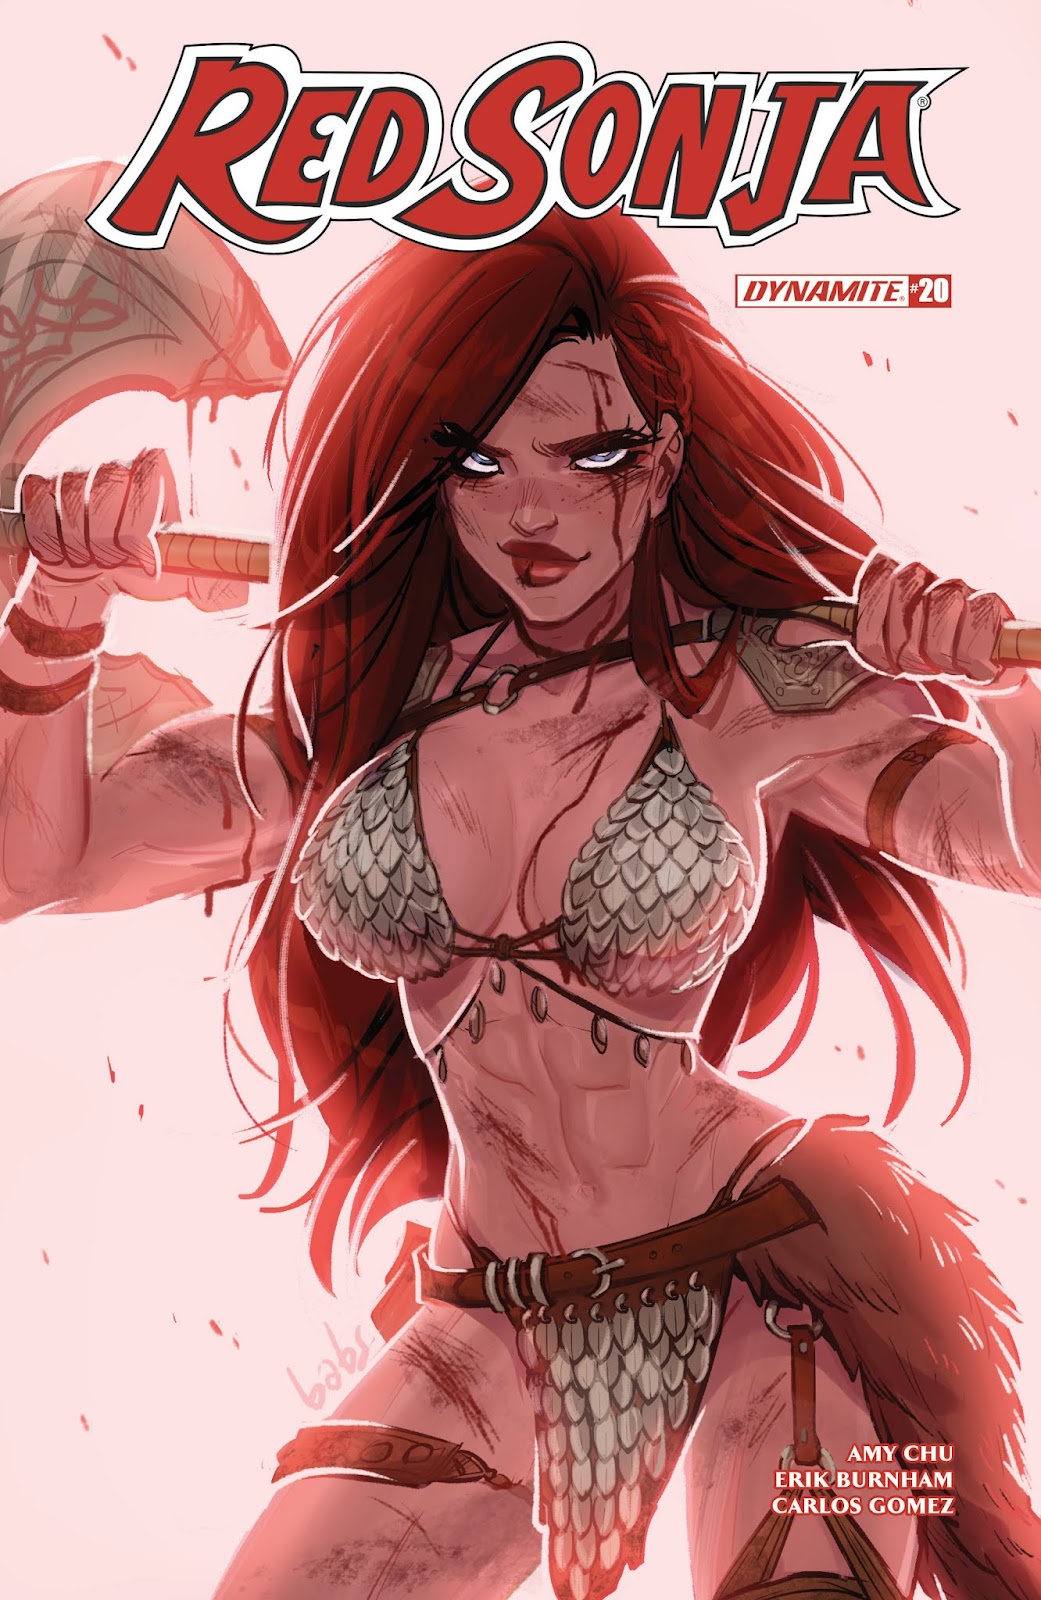 Red Sonja Vol. 4 issue 20 - Page 1